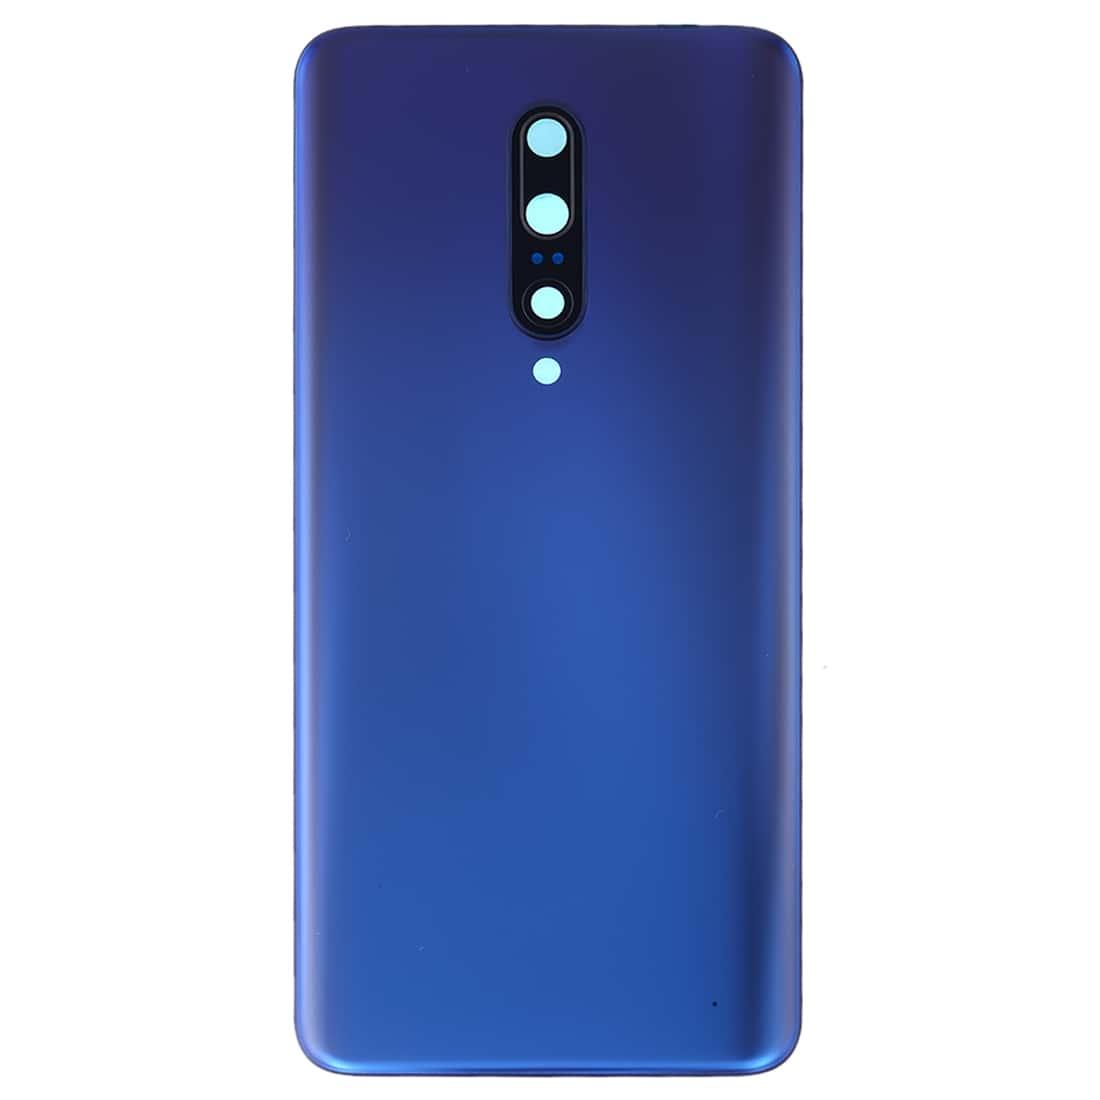 Back Glass Panel for Oneplus 7 Pro Blue with Camera Lens